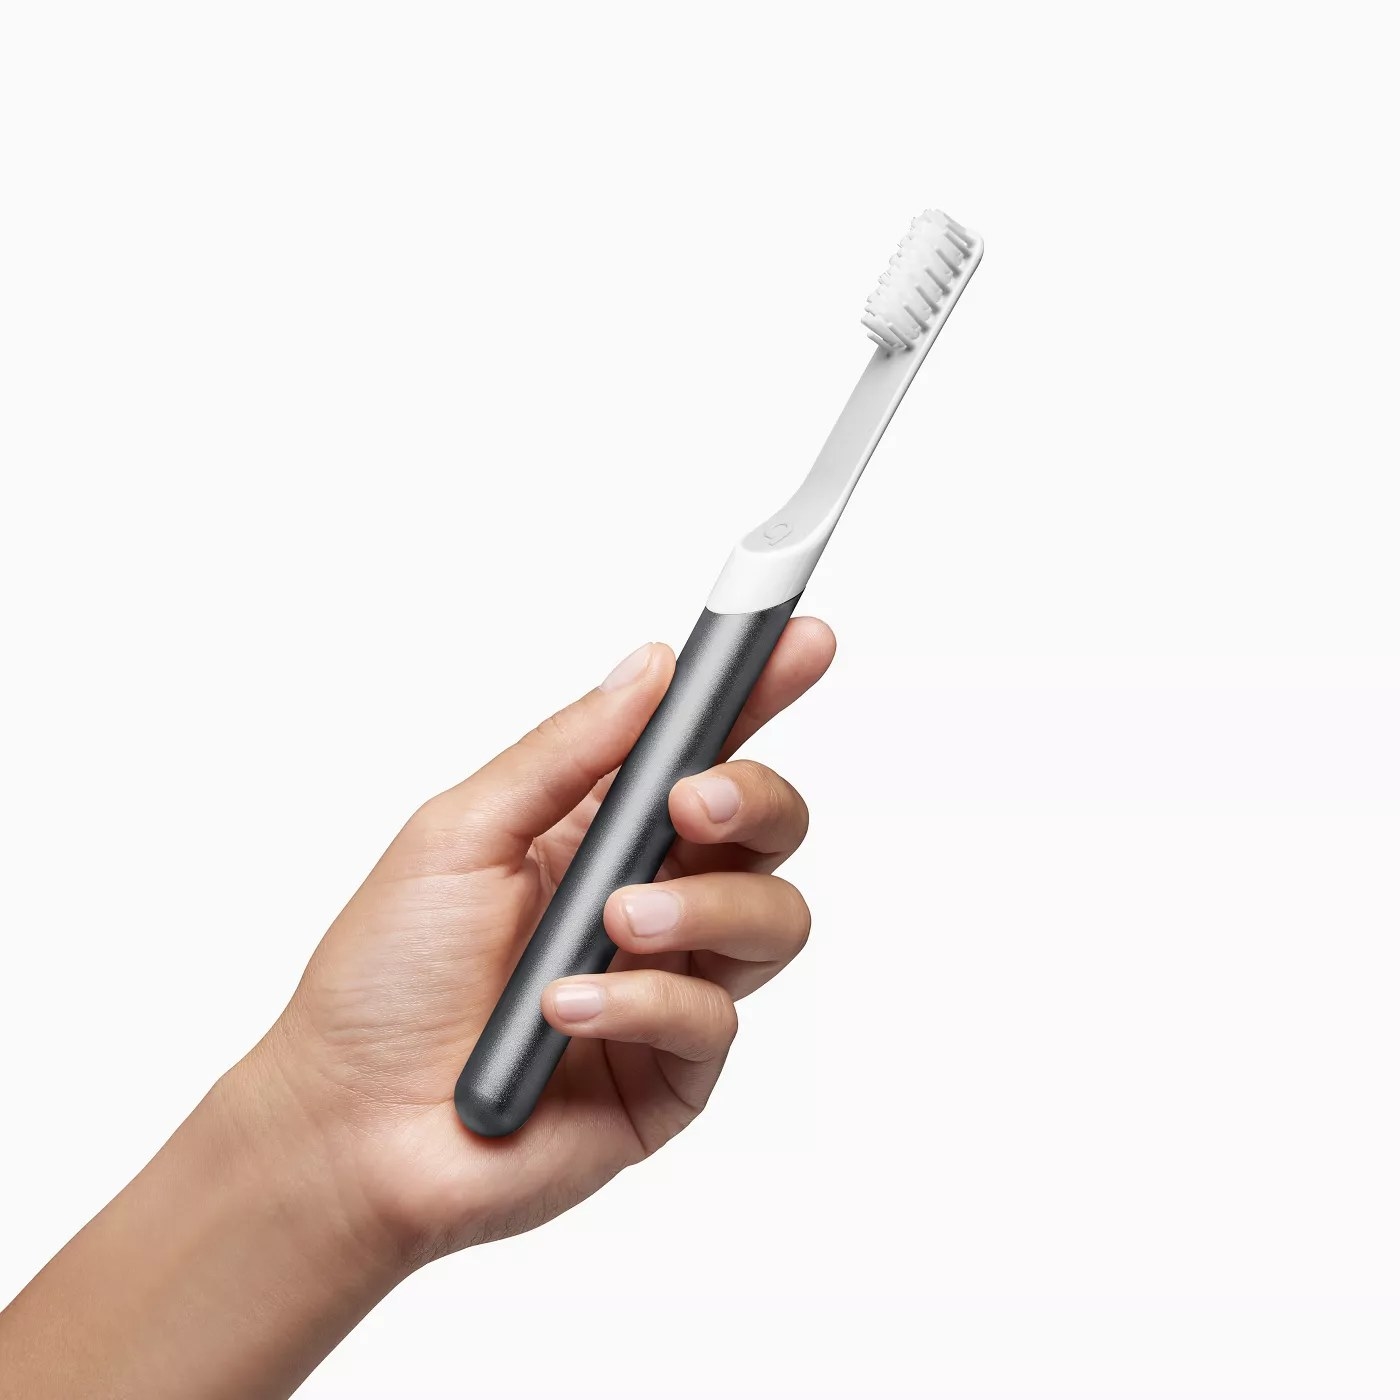 The toothbrush in gray